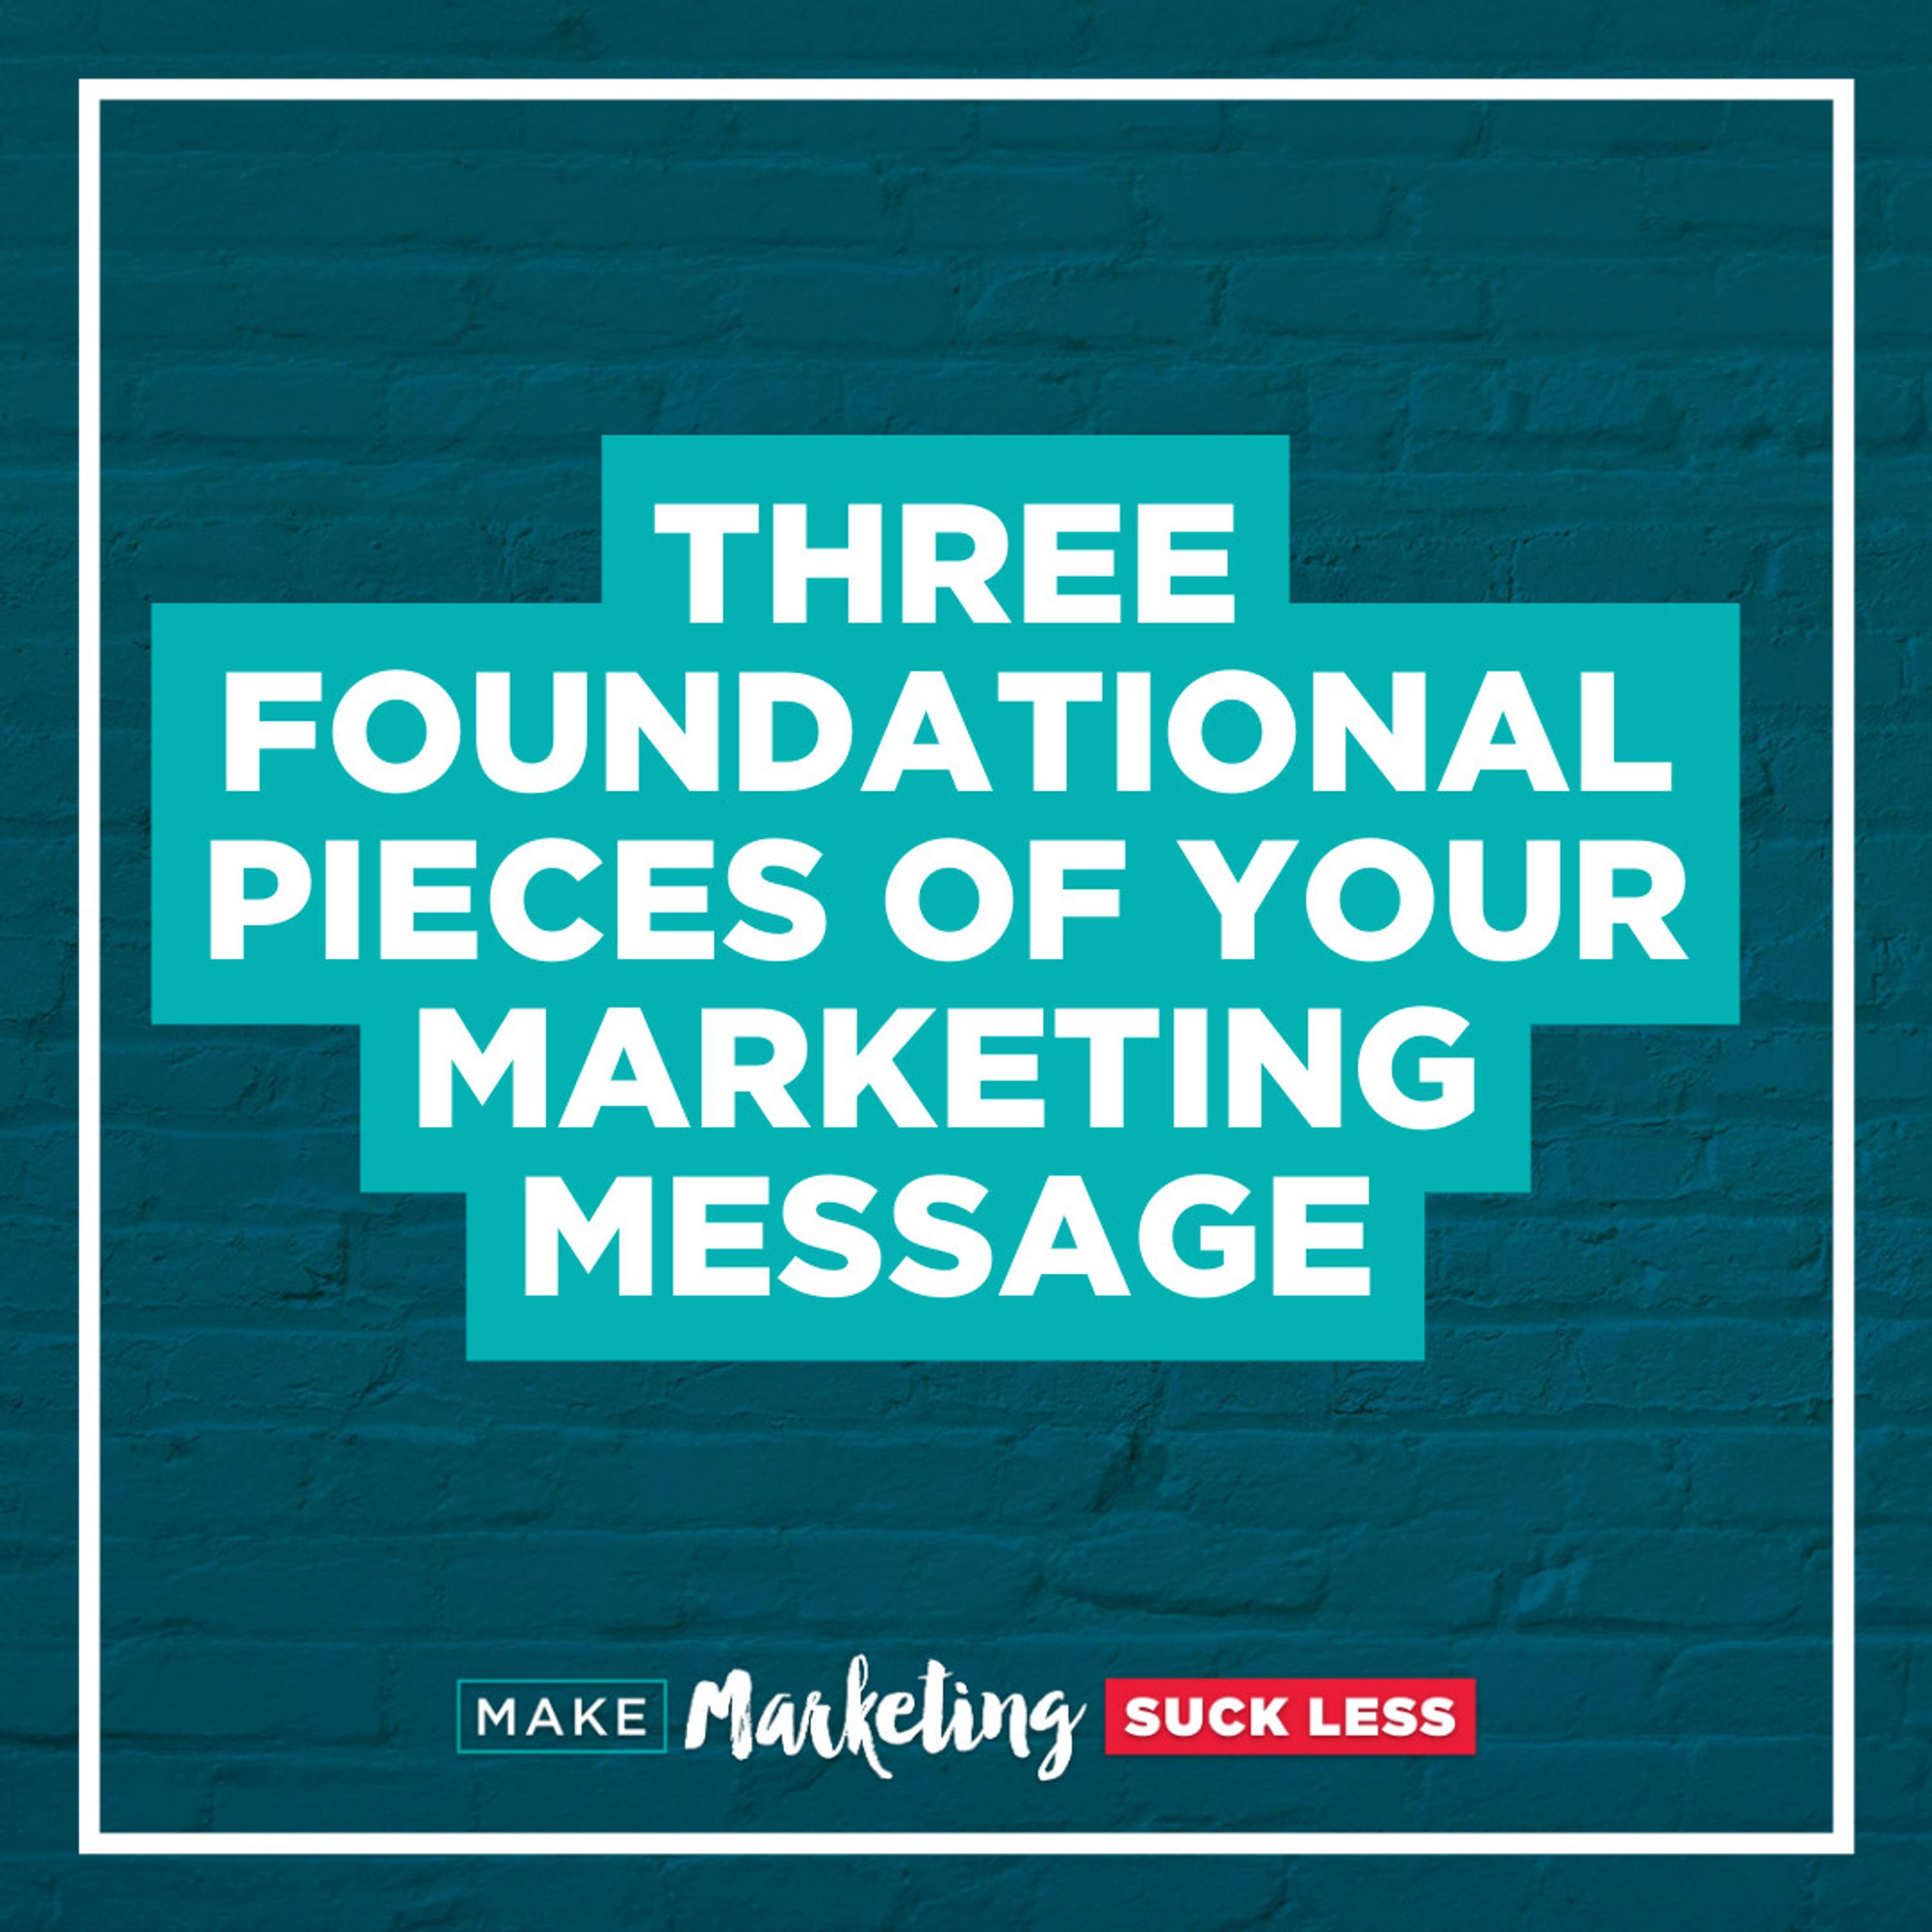 3 Foundational Pieces of Your Marketing Message